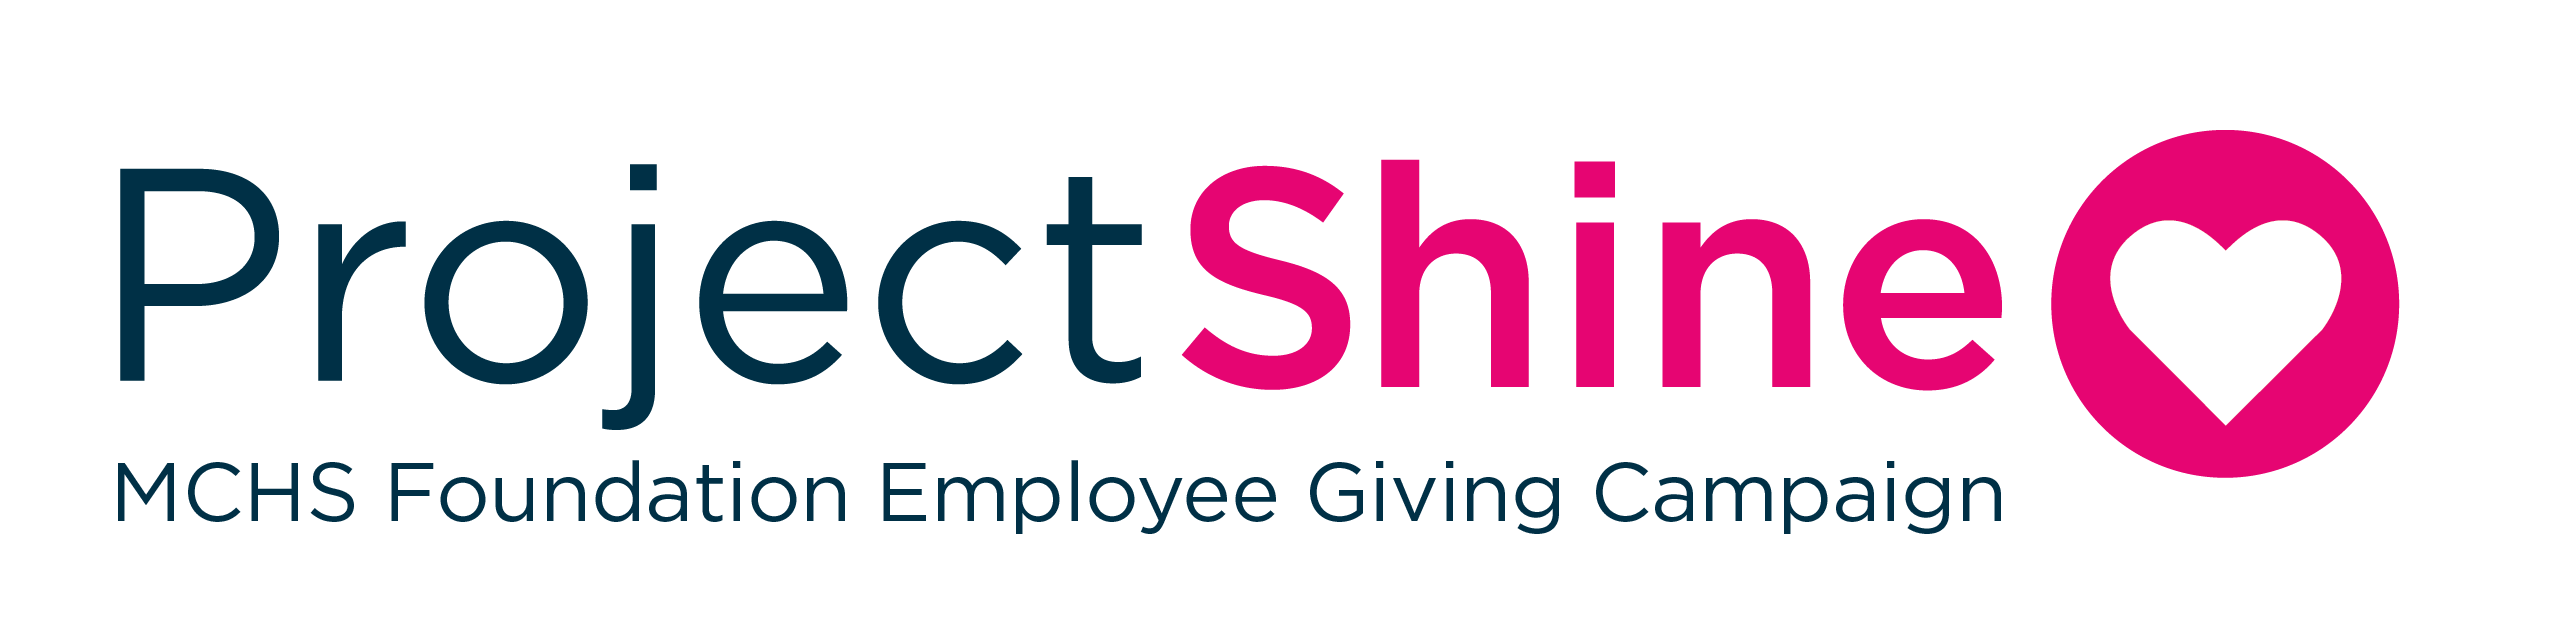 Project Shine employee giving campaign